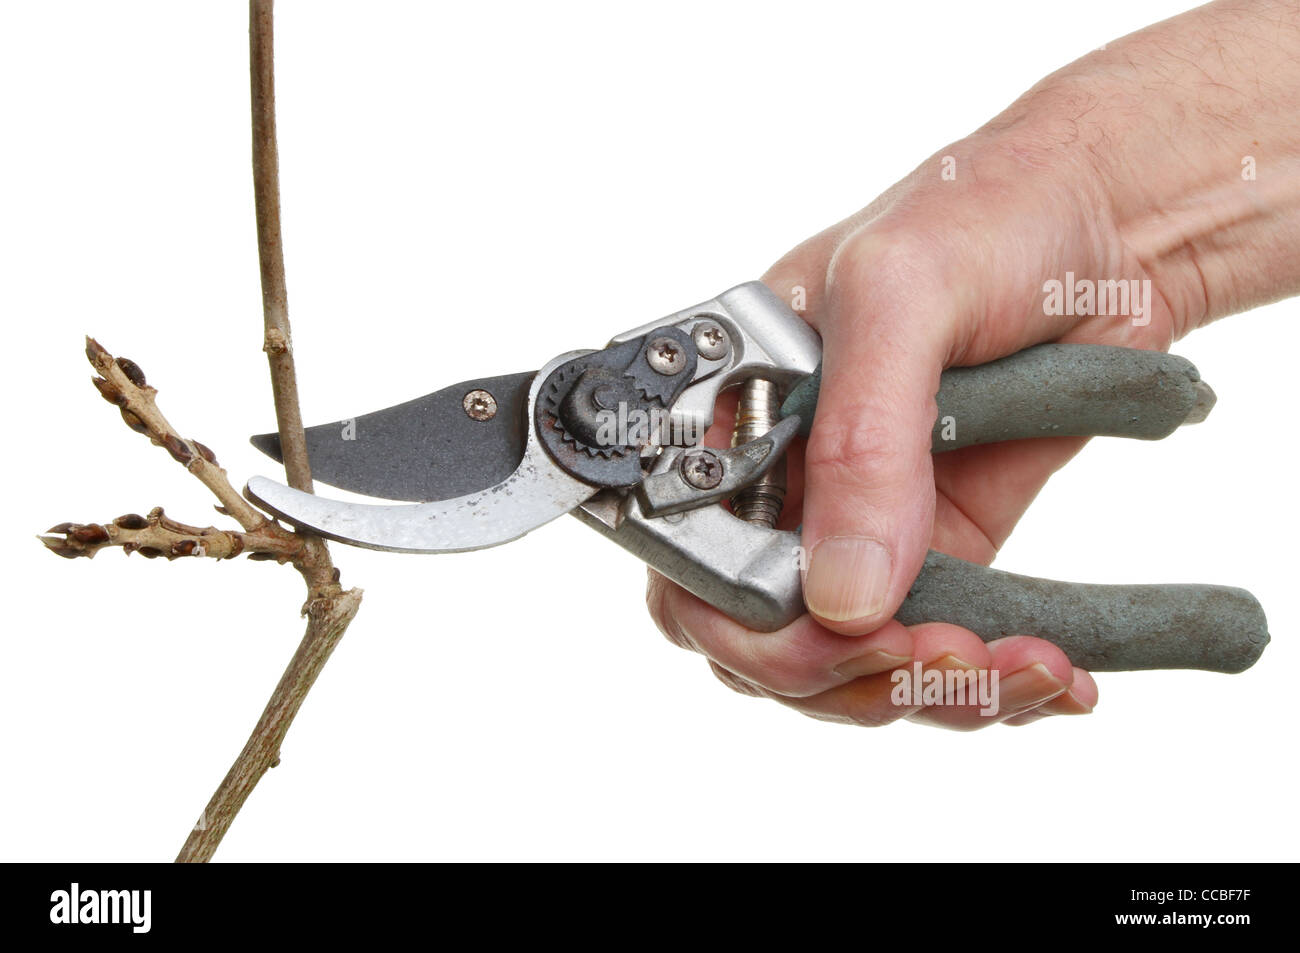 Closeup of secateurs in a hand pruning a shrub isolated against white Stock Photo